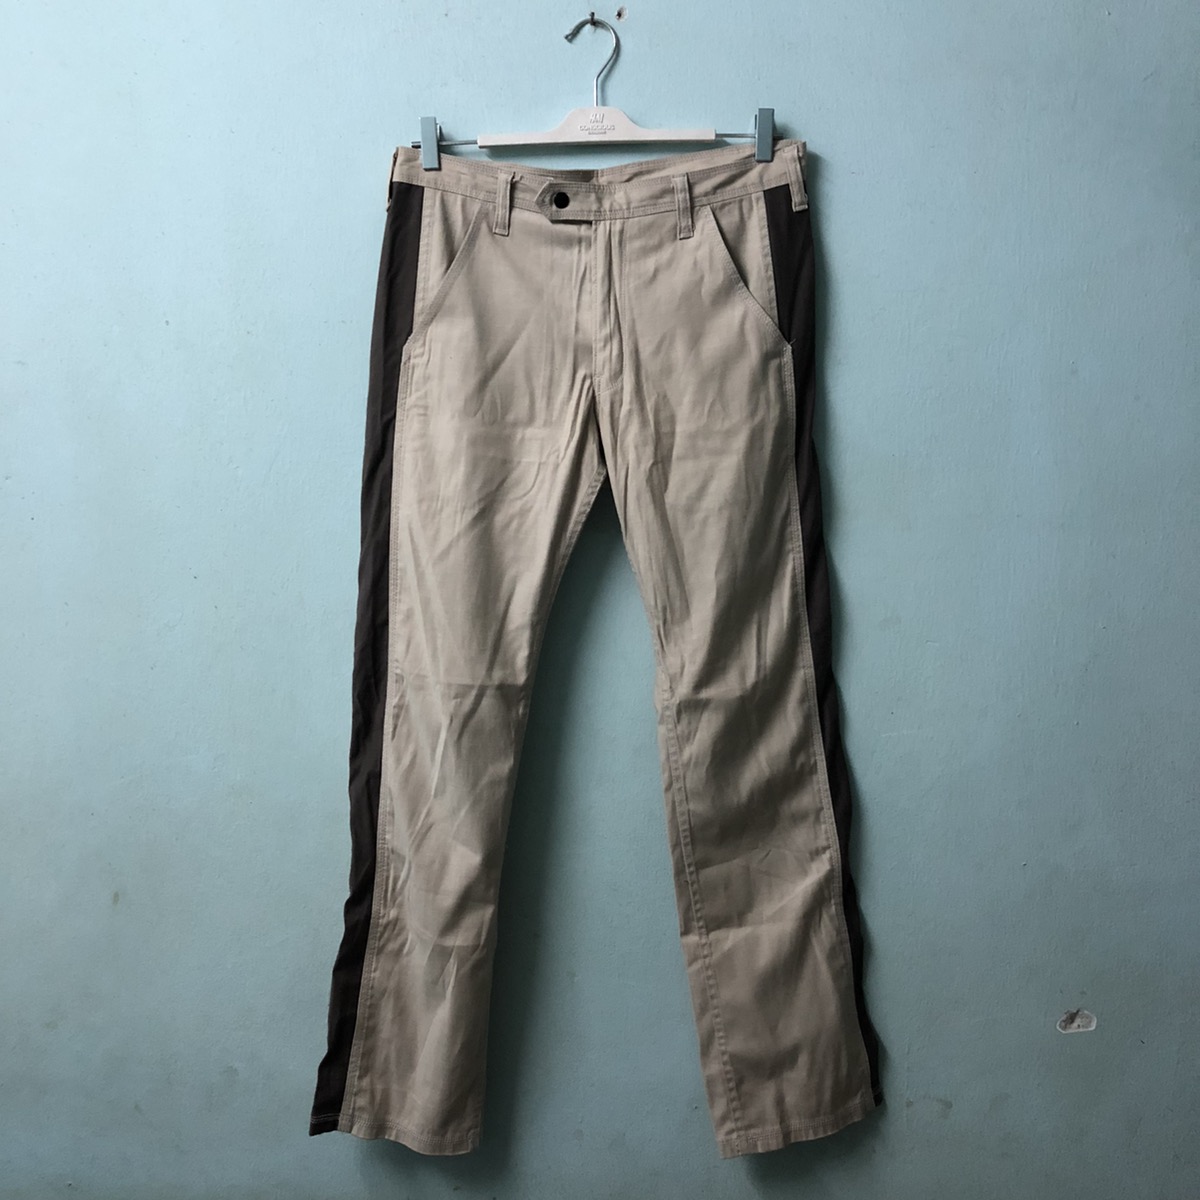 White Mountaineering side strape pants - 3